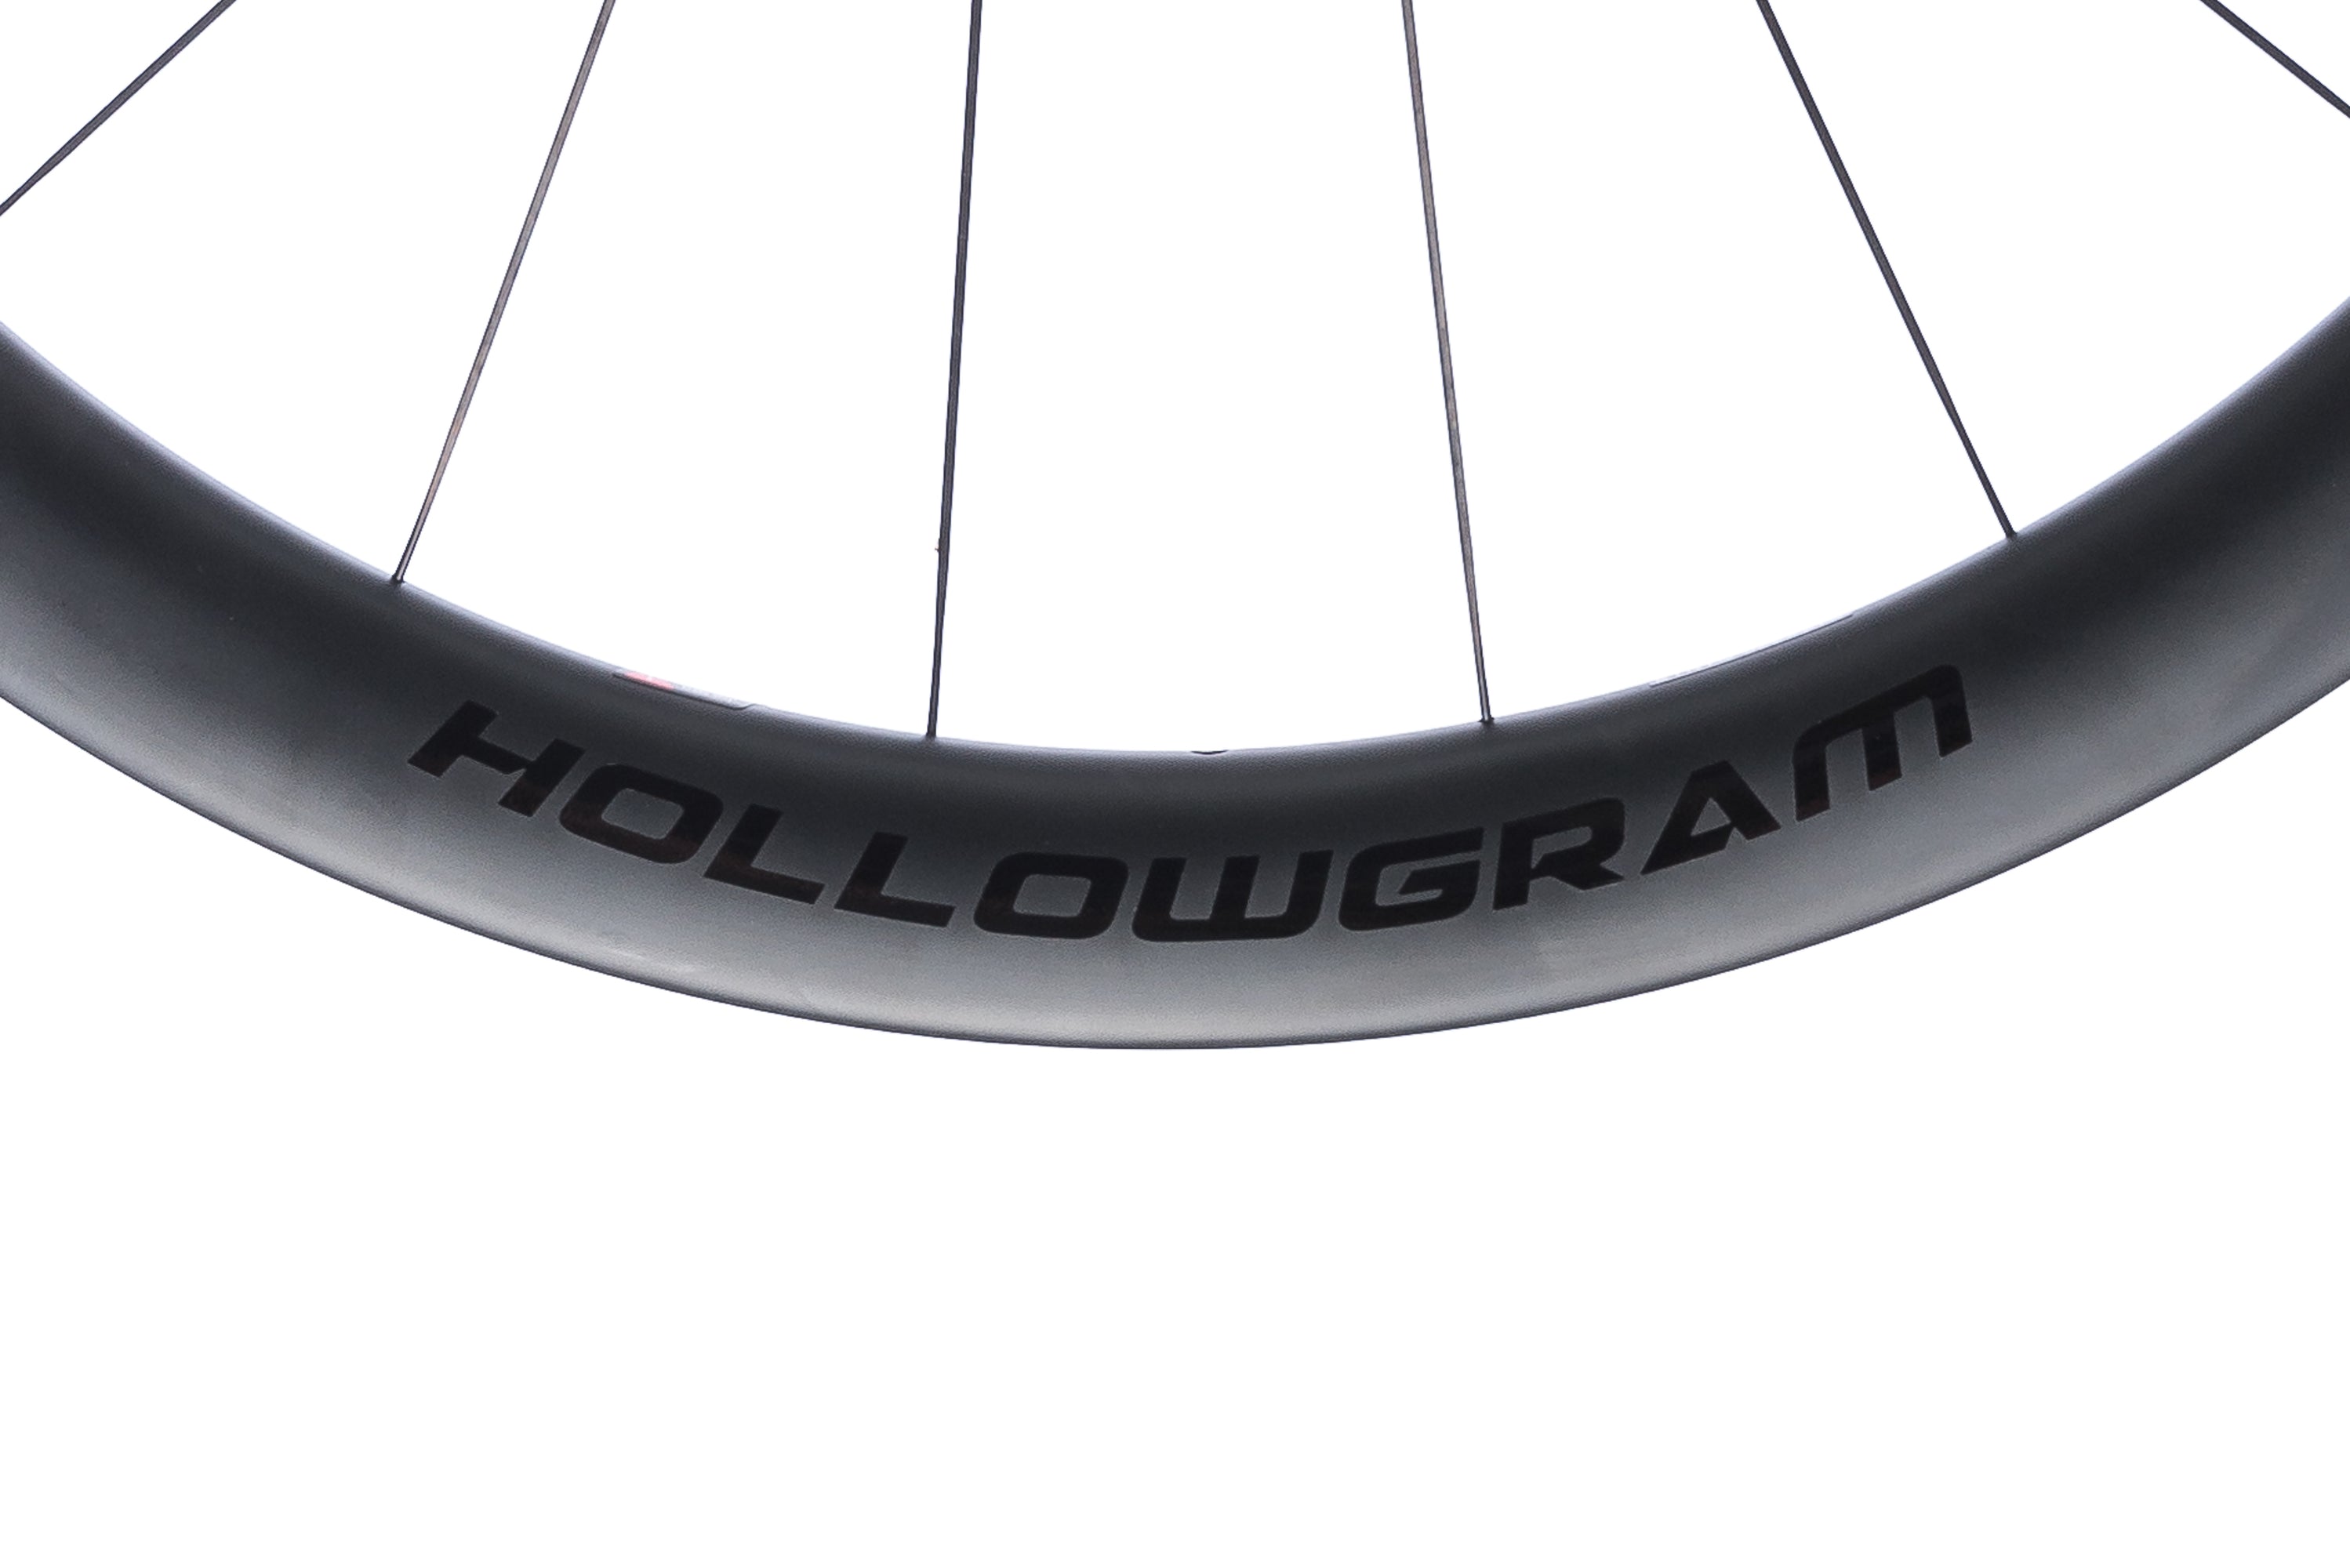 Cannondale Knot 45 HollowGram Disc Clincher 700c Wheelset - Weight